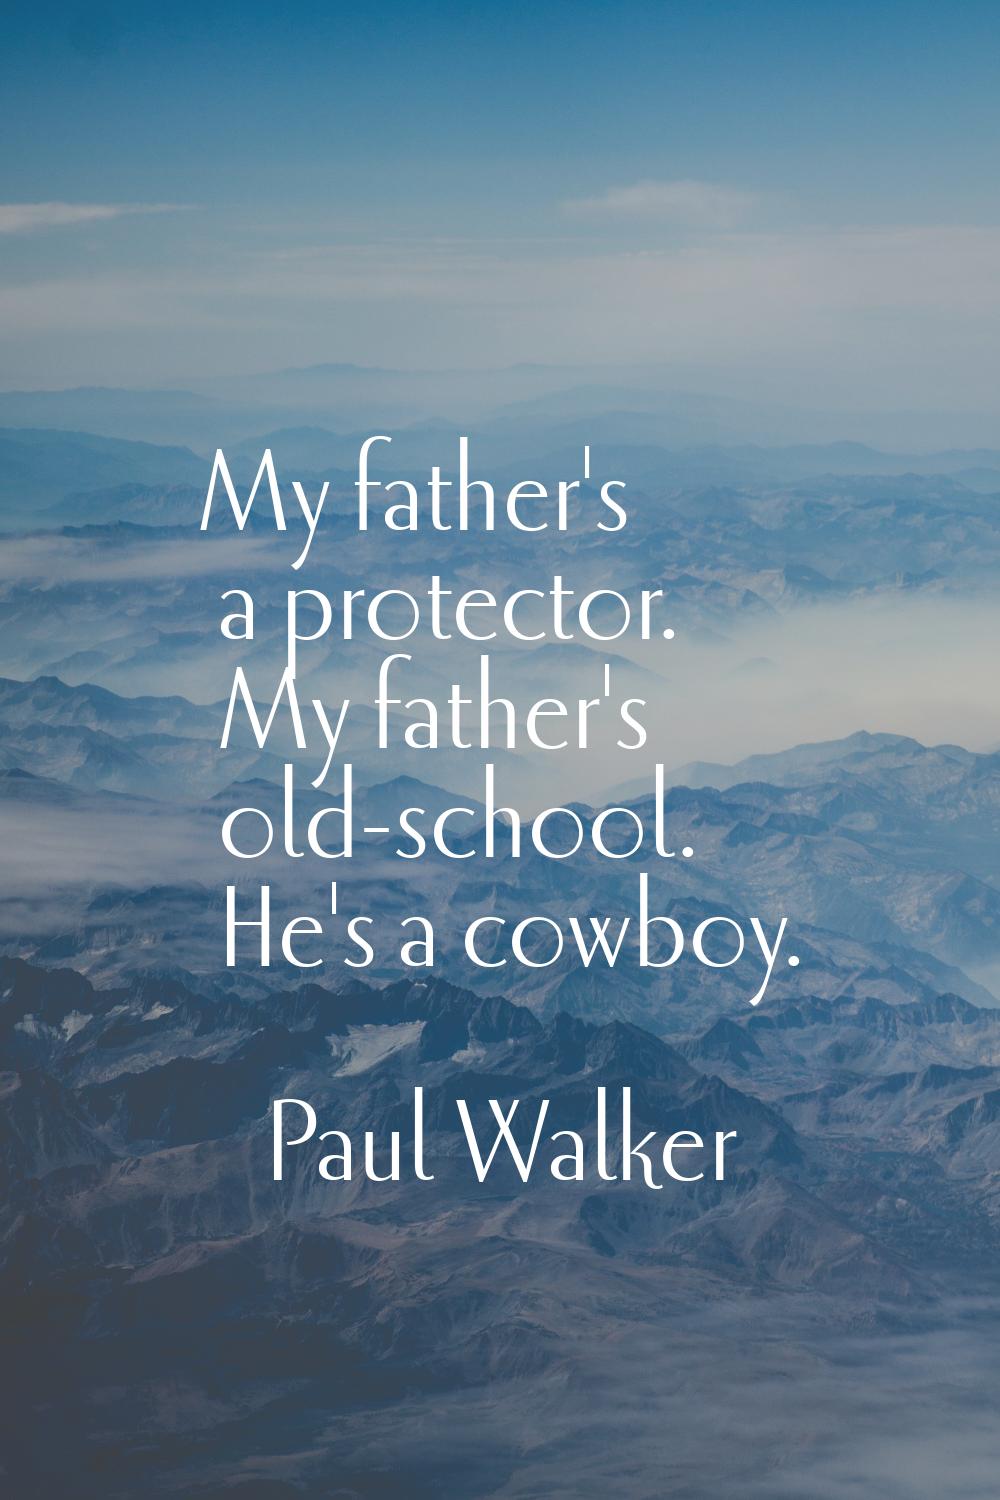 My father's a protector. My father's old-school. He's a cowboy.